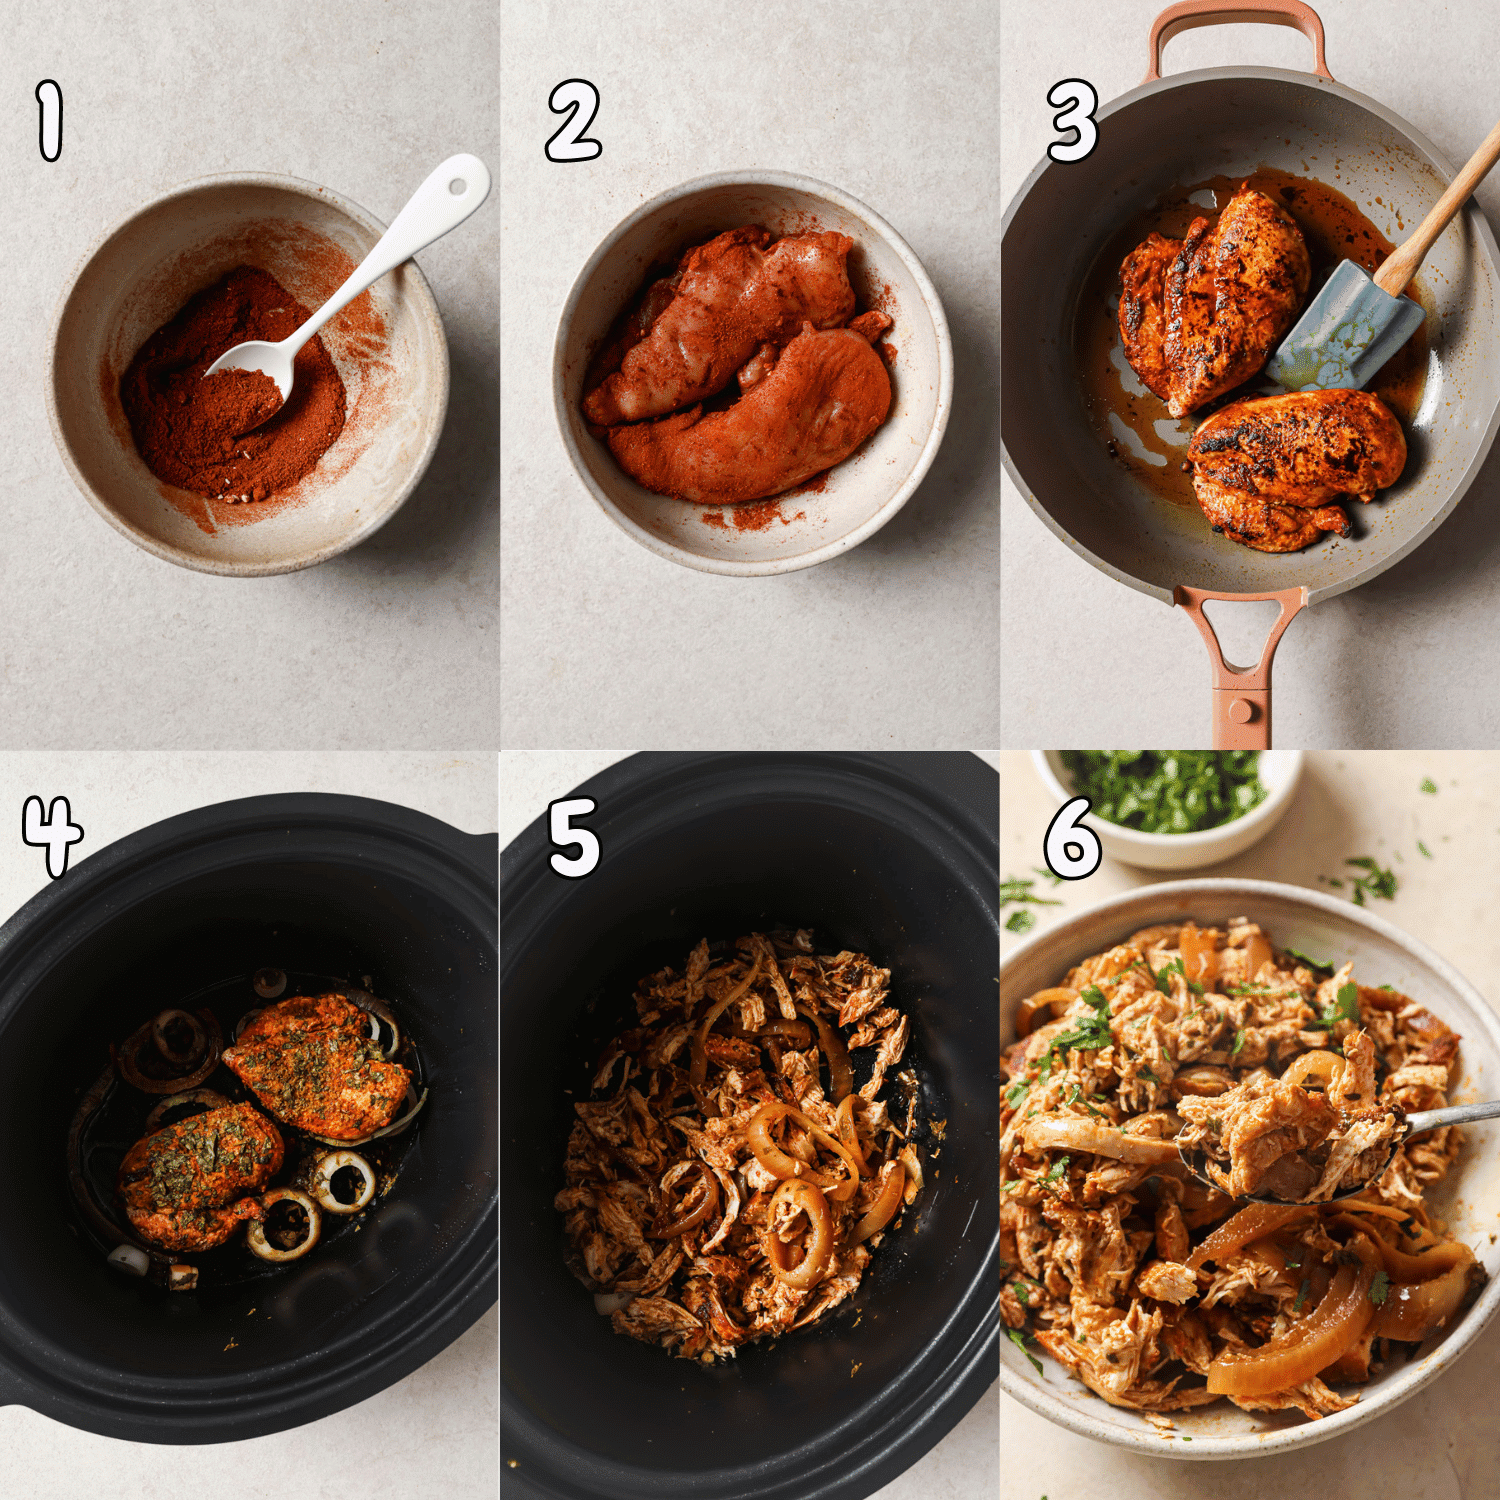 6-step collage showing how to make chili lime chicken in the slow cooker.